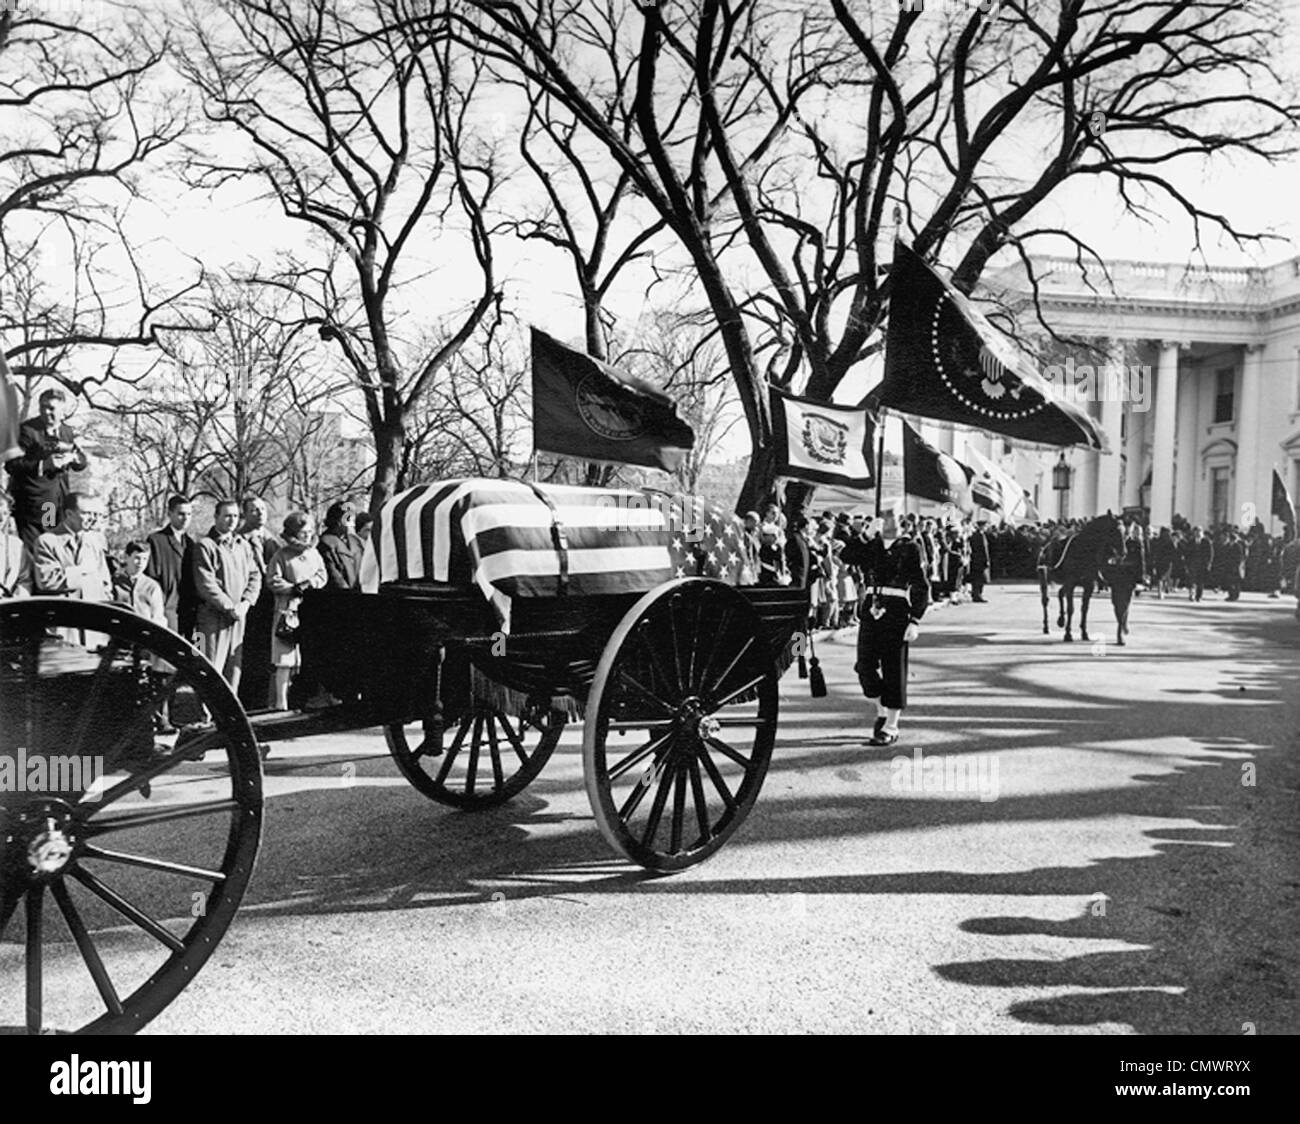 JOHN F KENNEDY (1917-1963) His funeral procession leaves the White House on 25 November 1963 Stock Photo